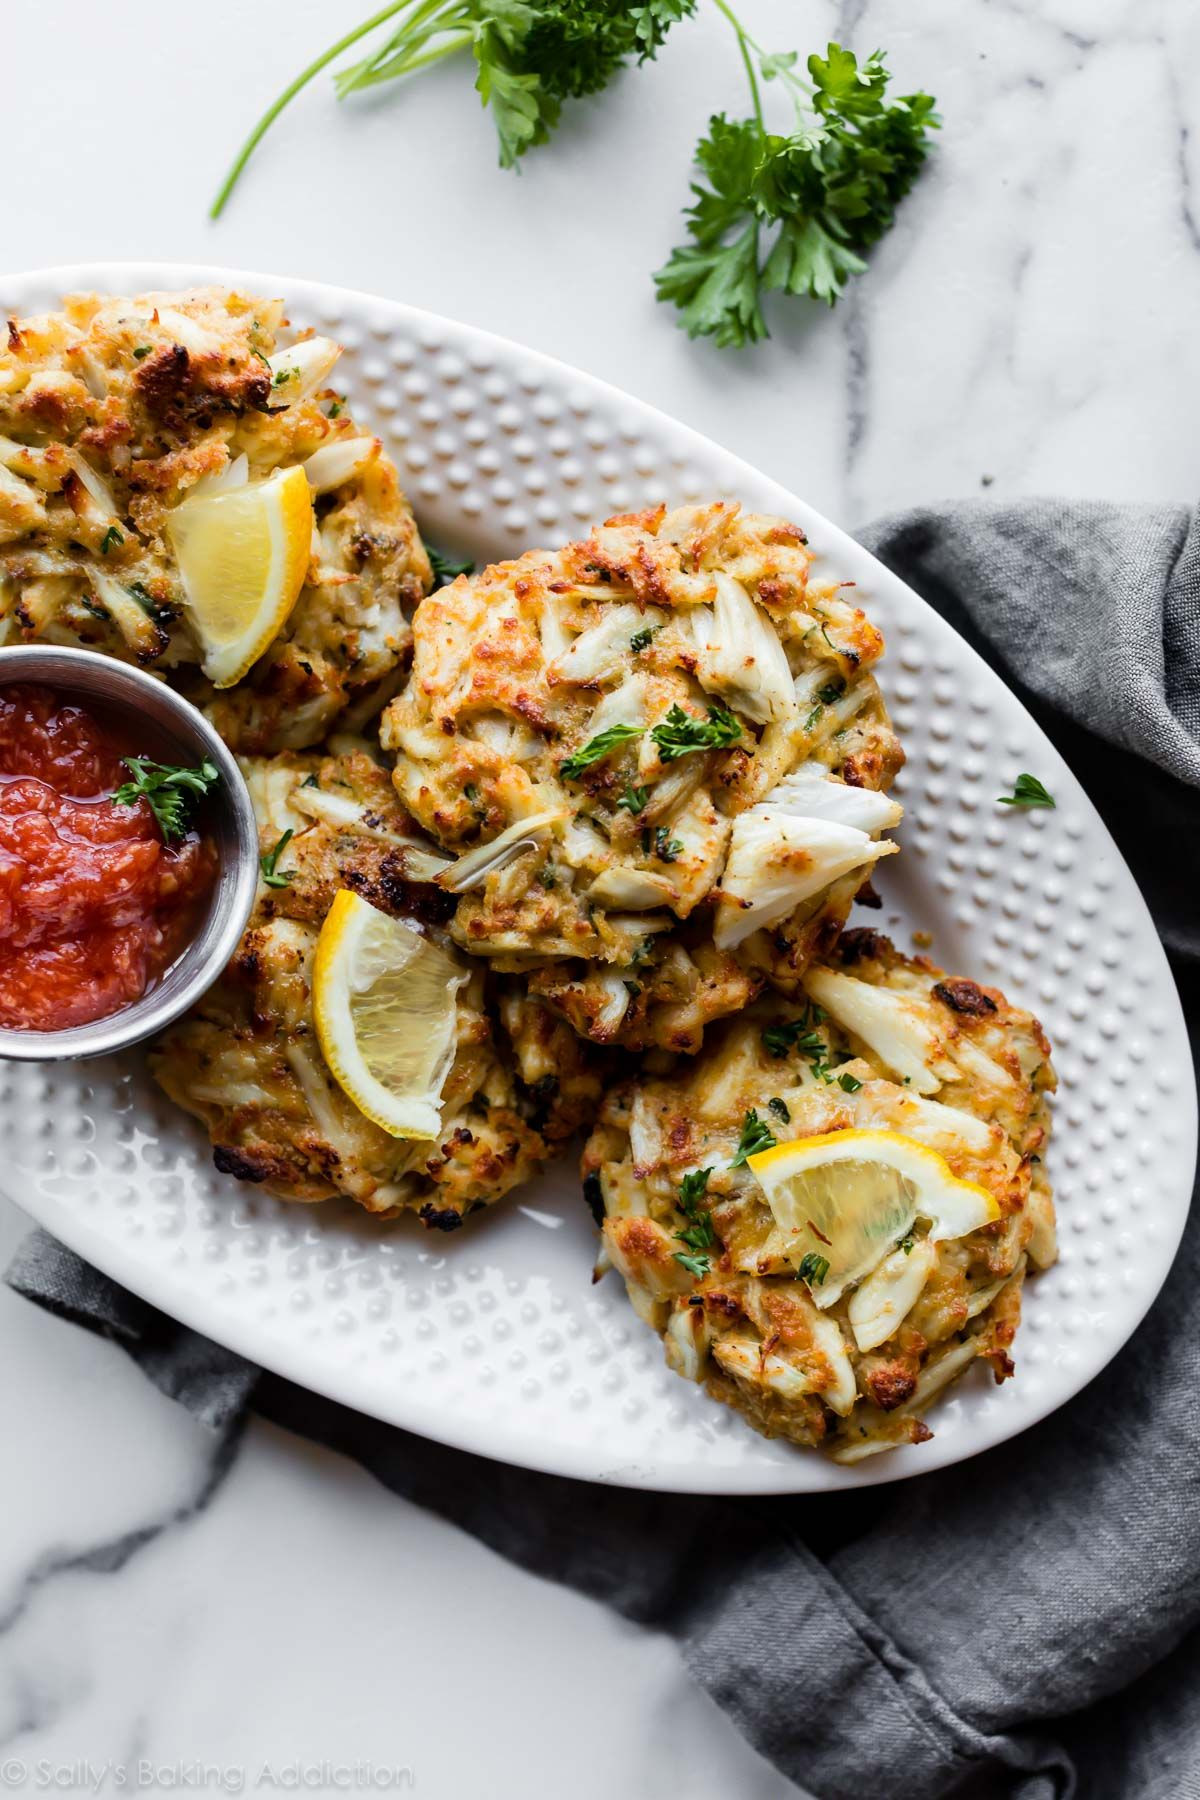 Healthy Crab Cake Recipe
 Maryland lump crab cake recipe with little filler Plump